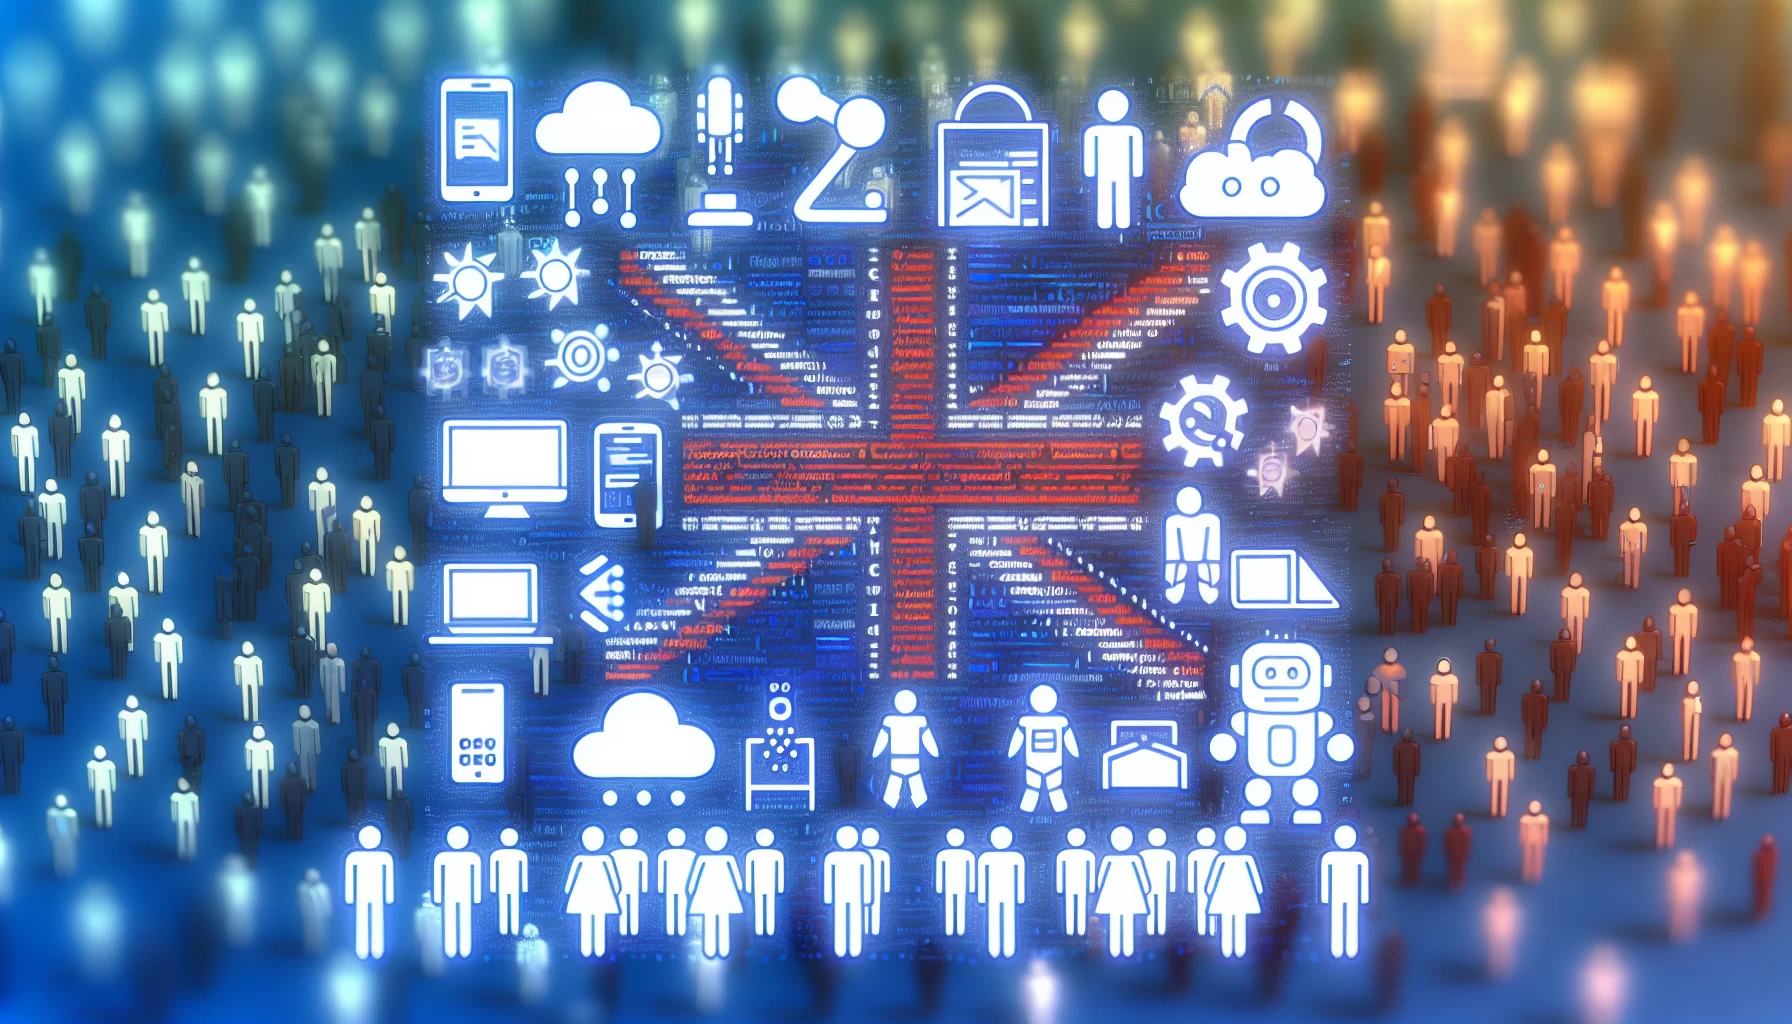 Uk's tech dominance amidst Brexit and rising European competition